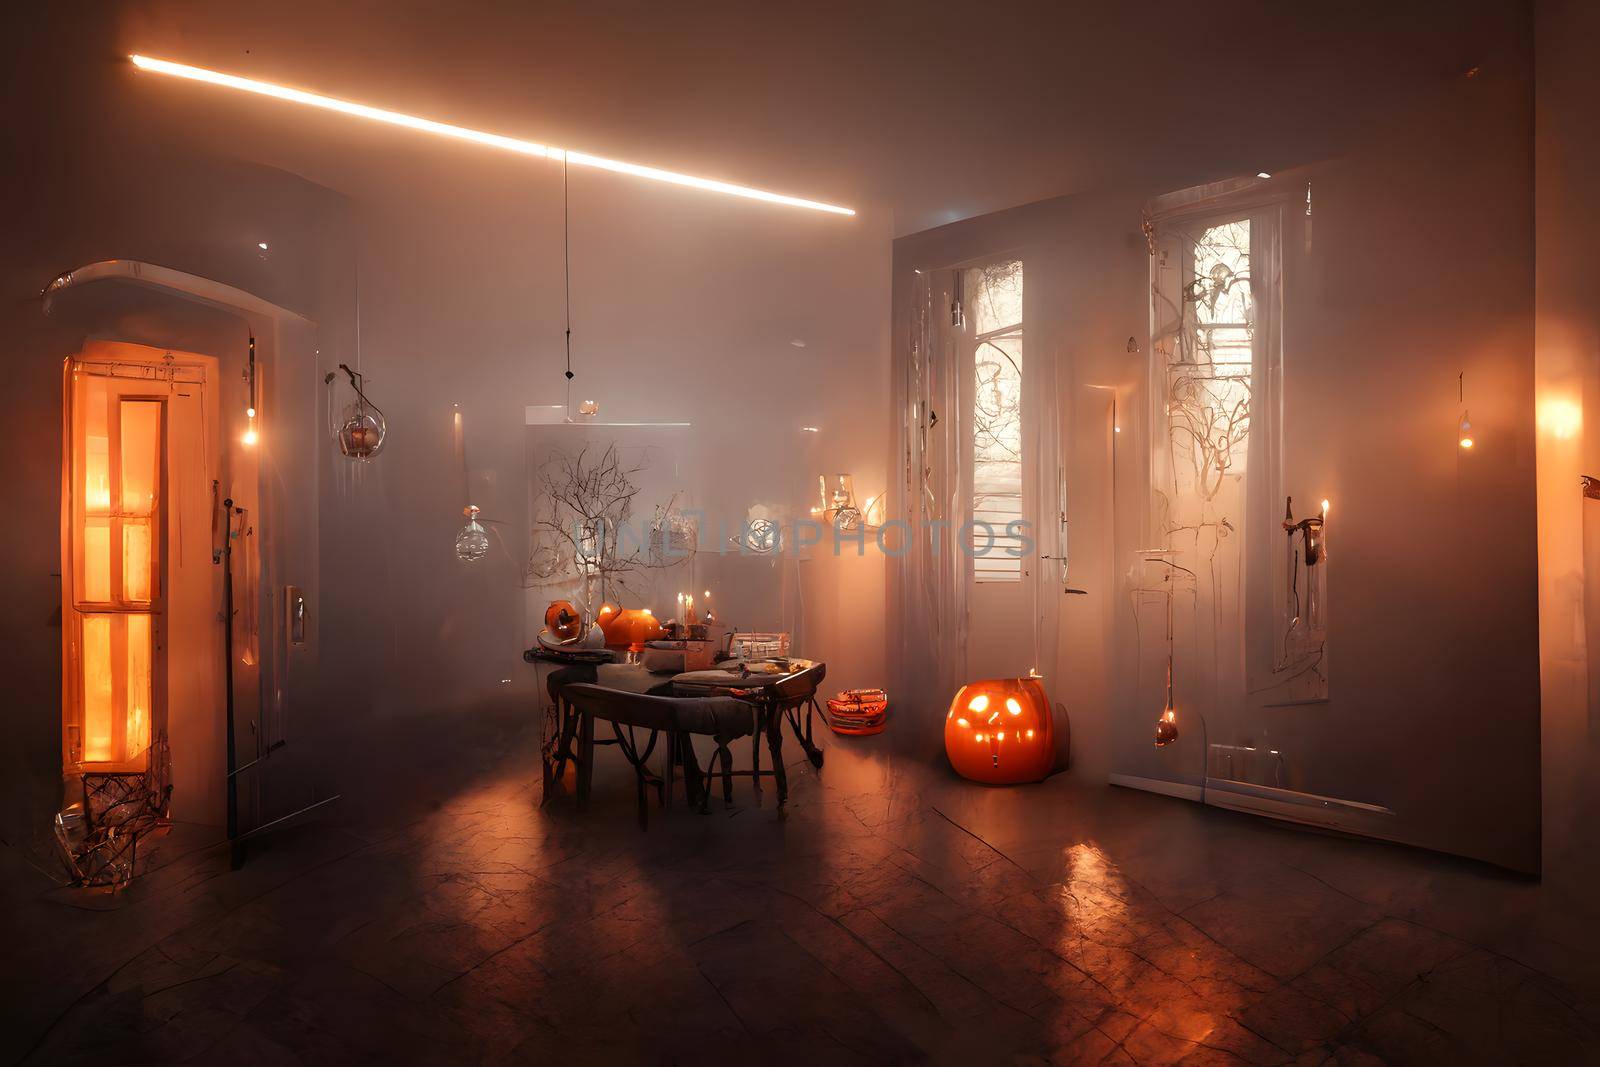 halloween decorated home interior with costumed figures, neural network generated art by z1b